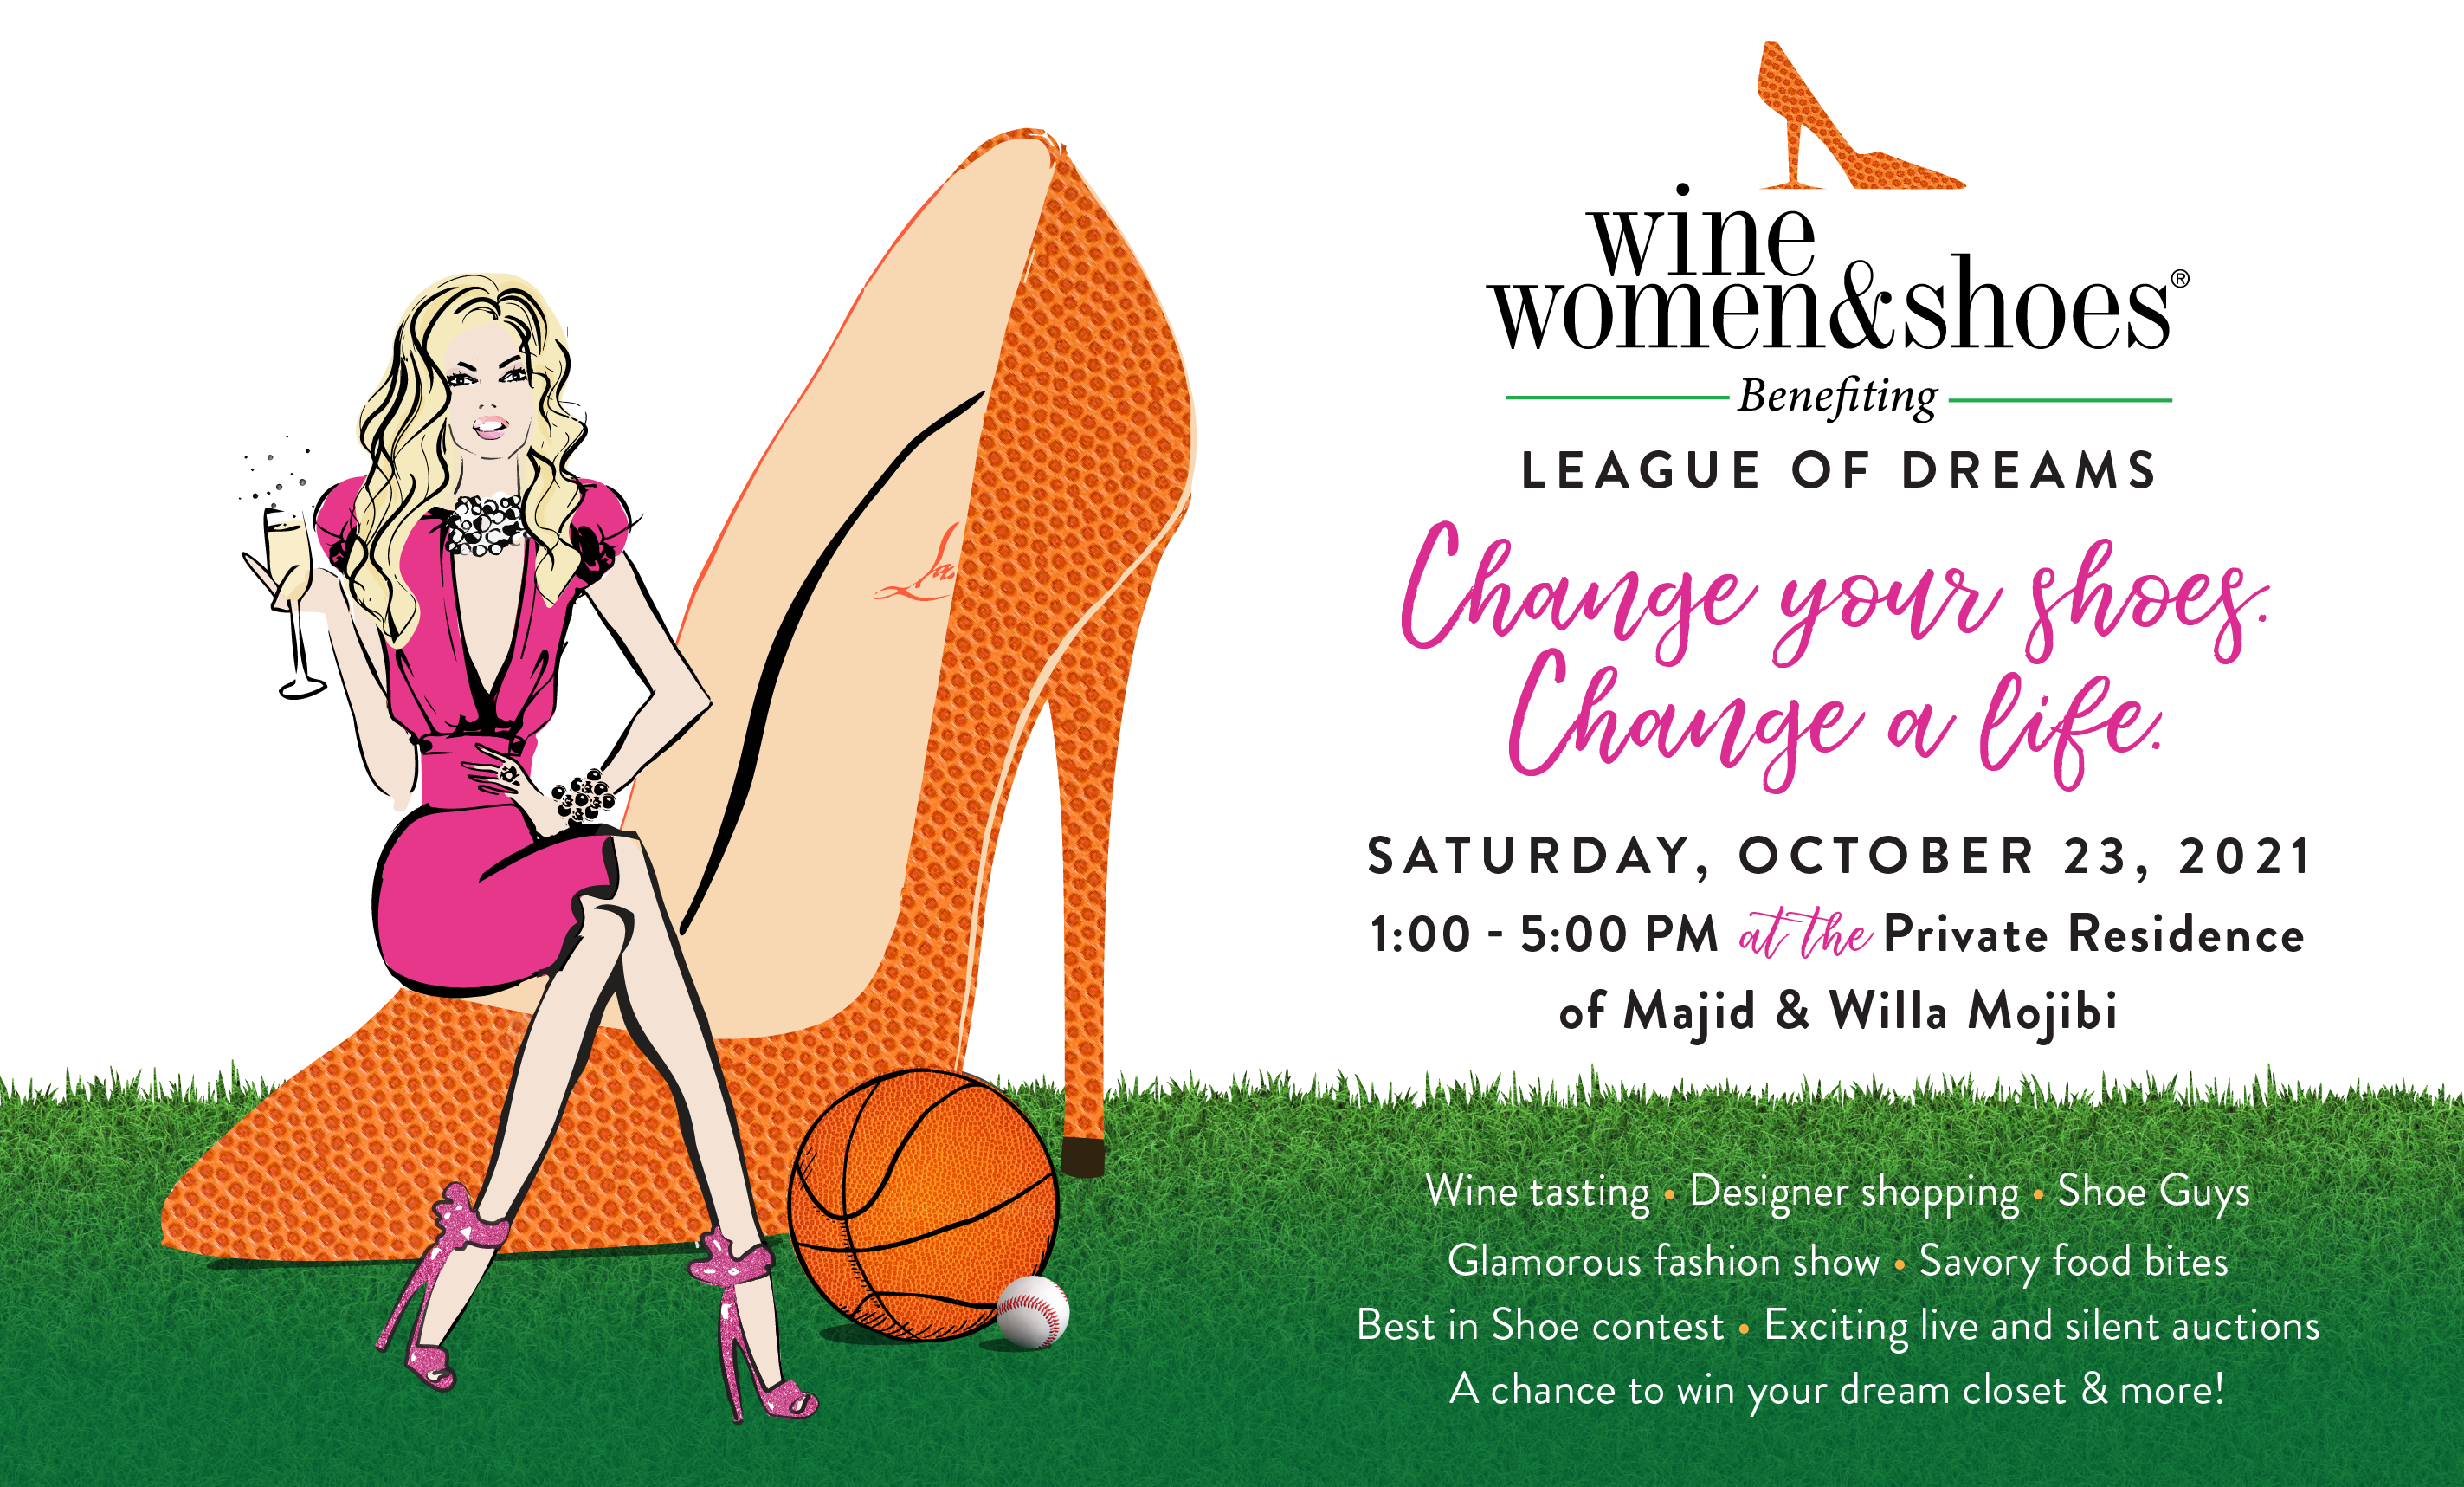 Executive Director of The League Of Dreams Pumps-up Wine, Women, and Shoes Event